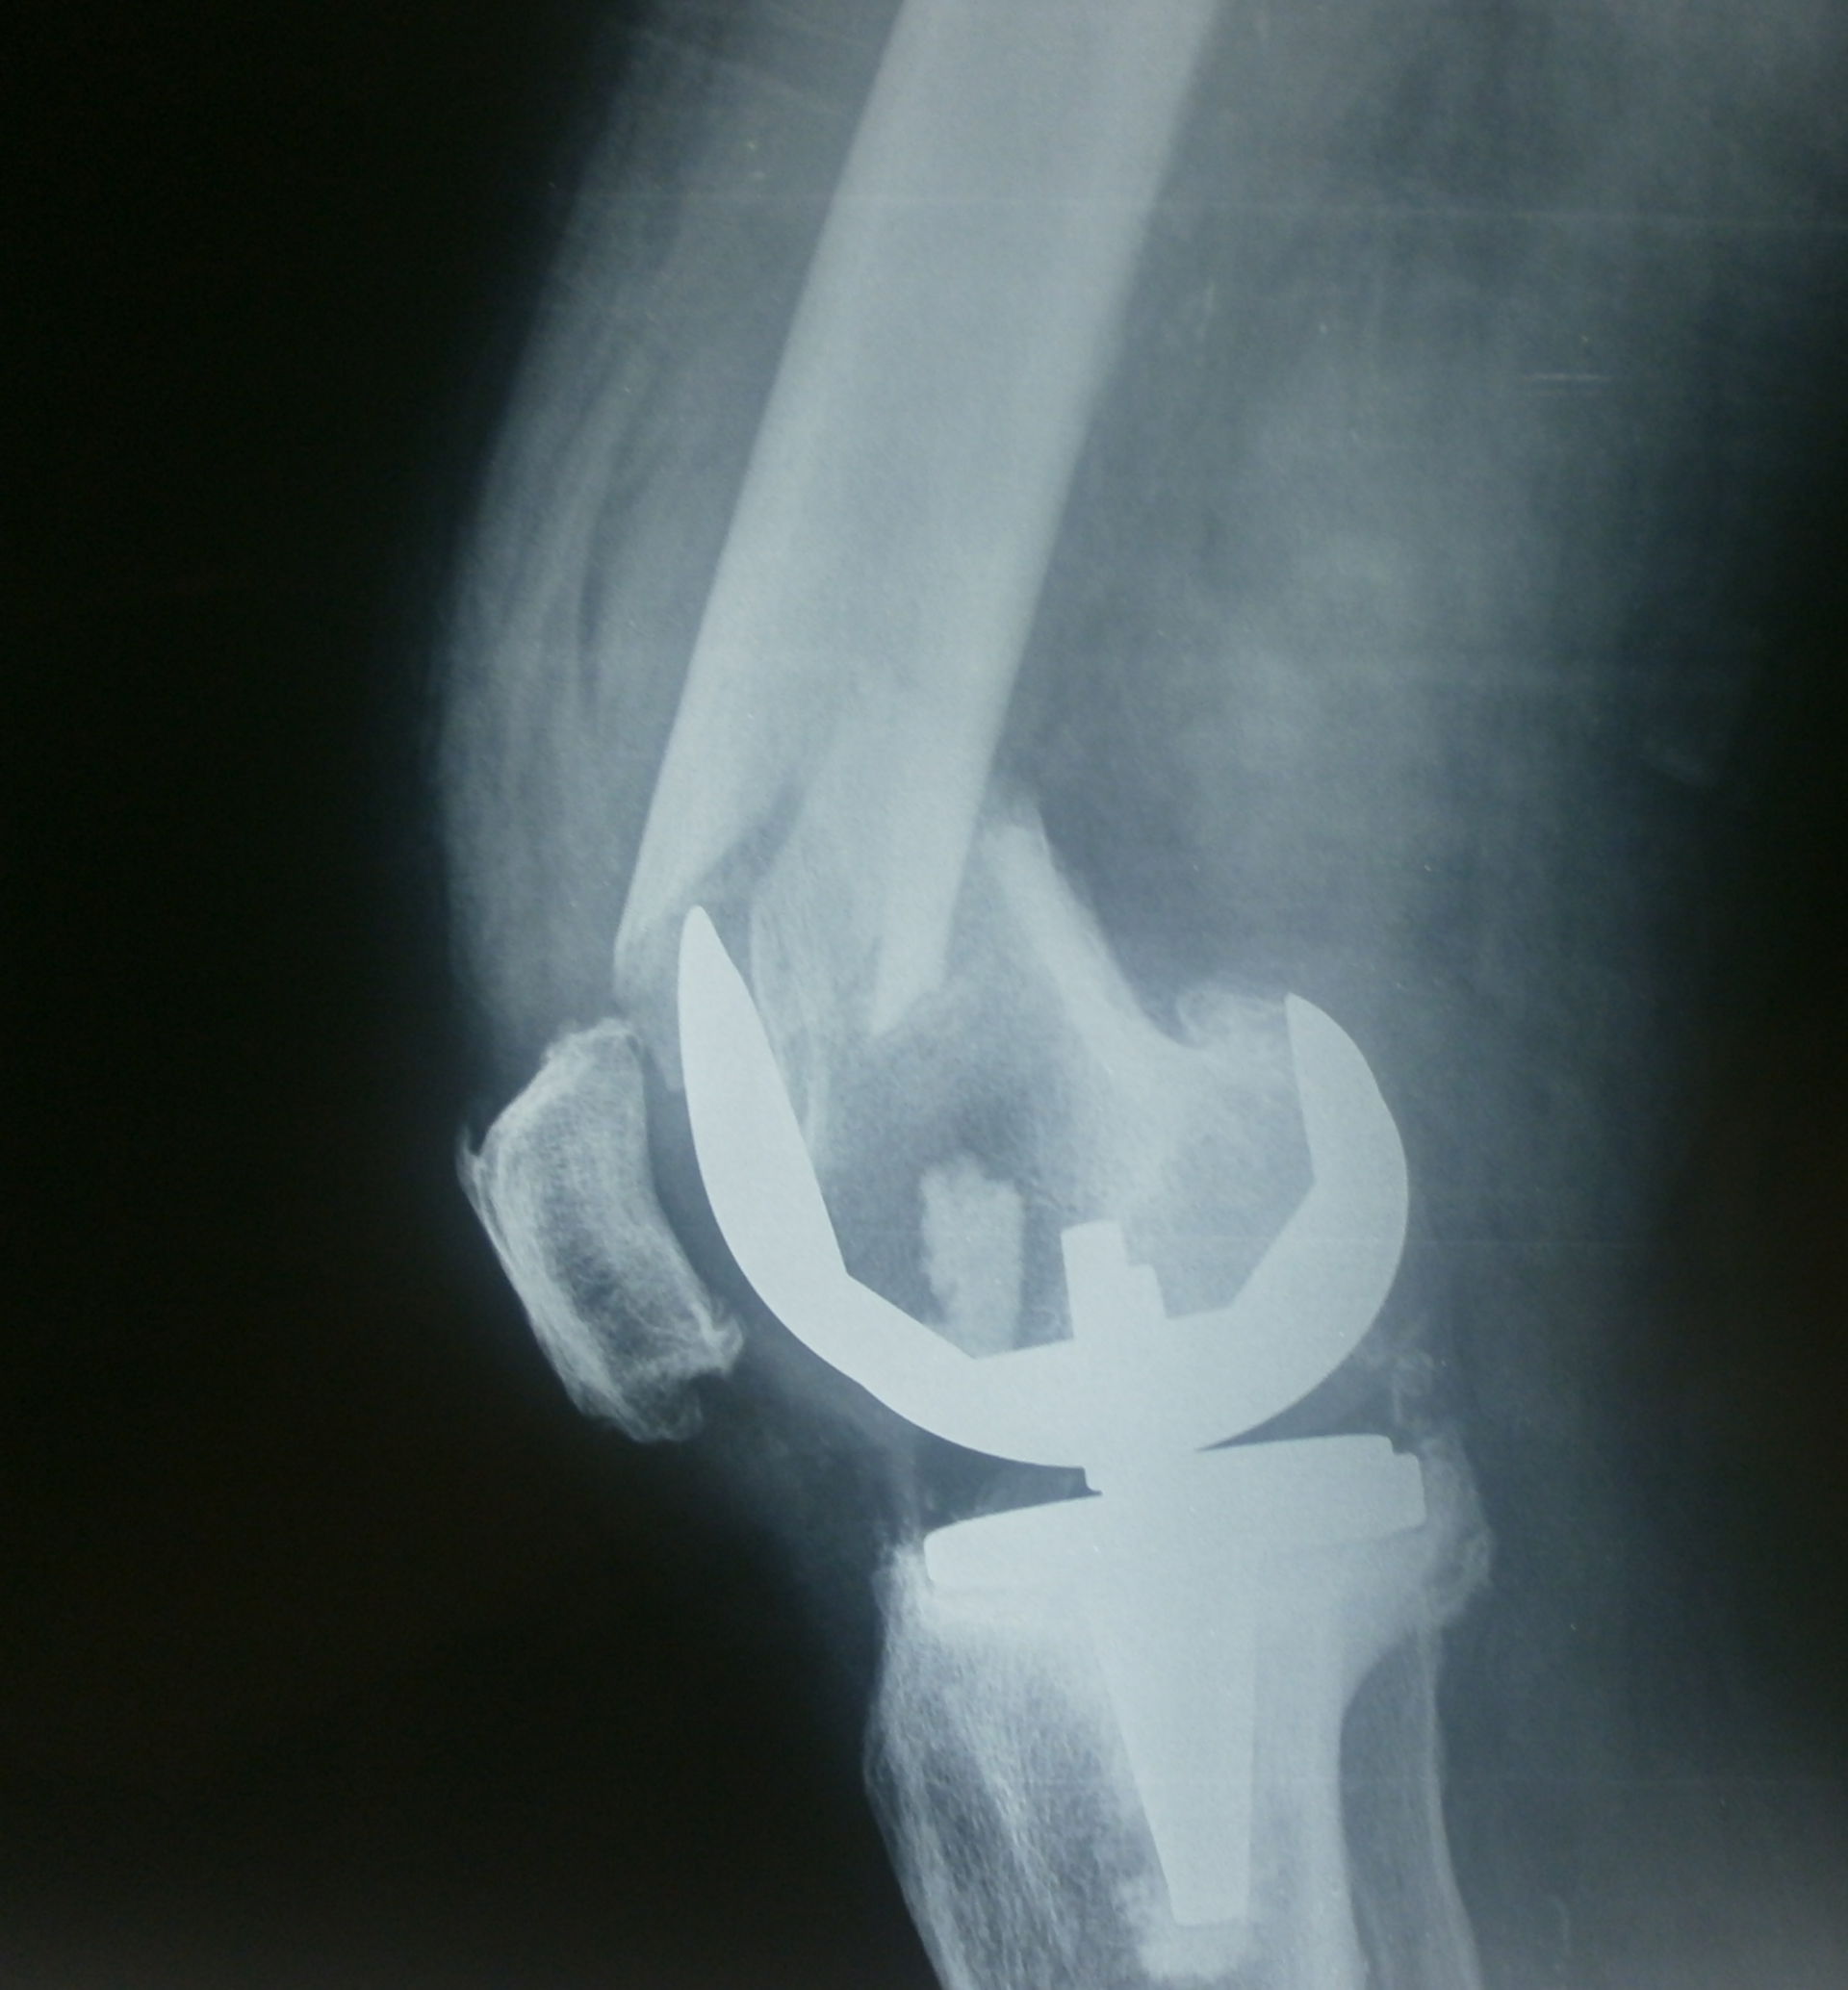 Periprosthetic fracture knee